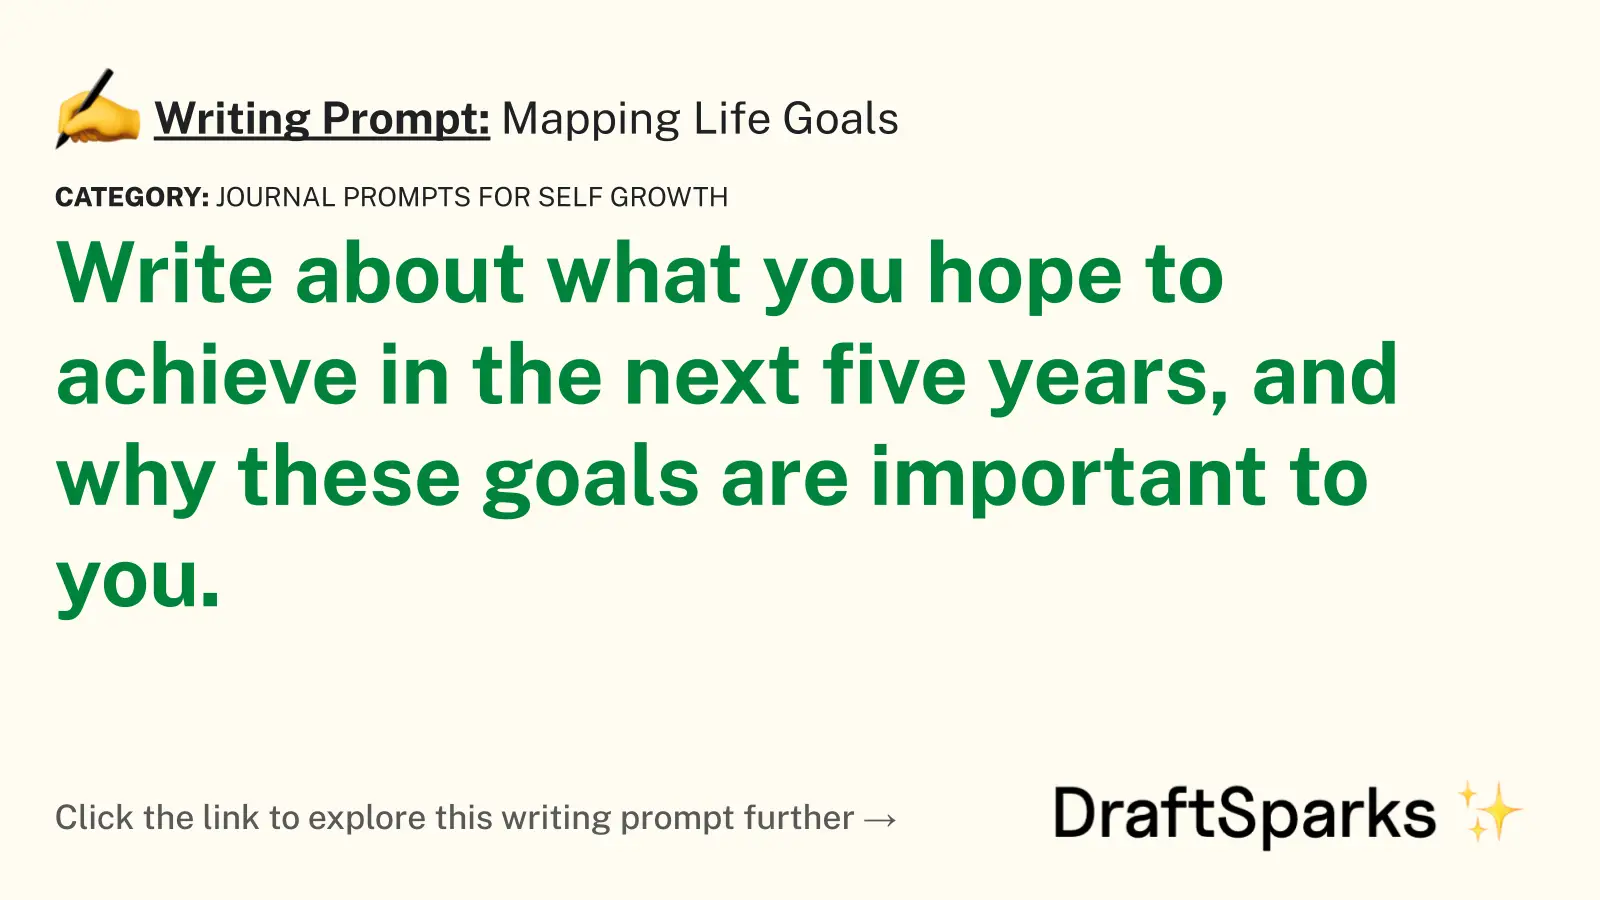 Mapping Life Goals